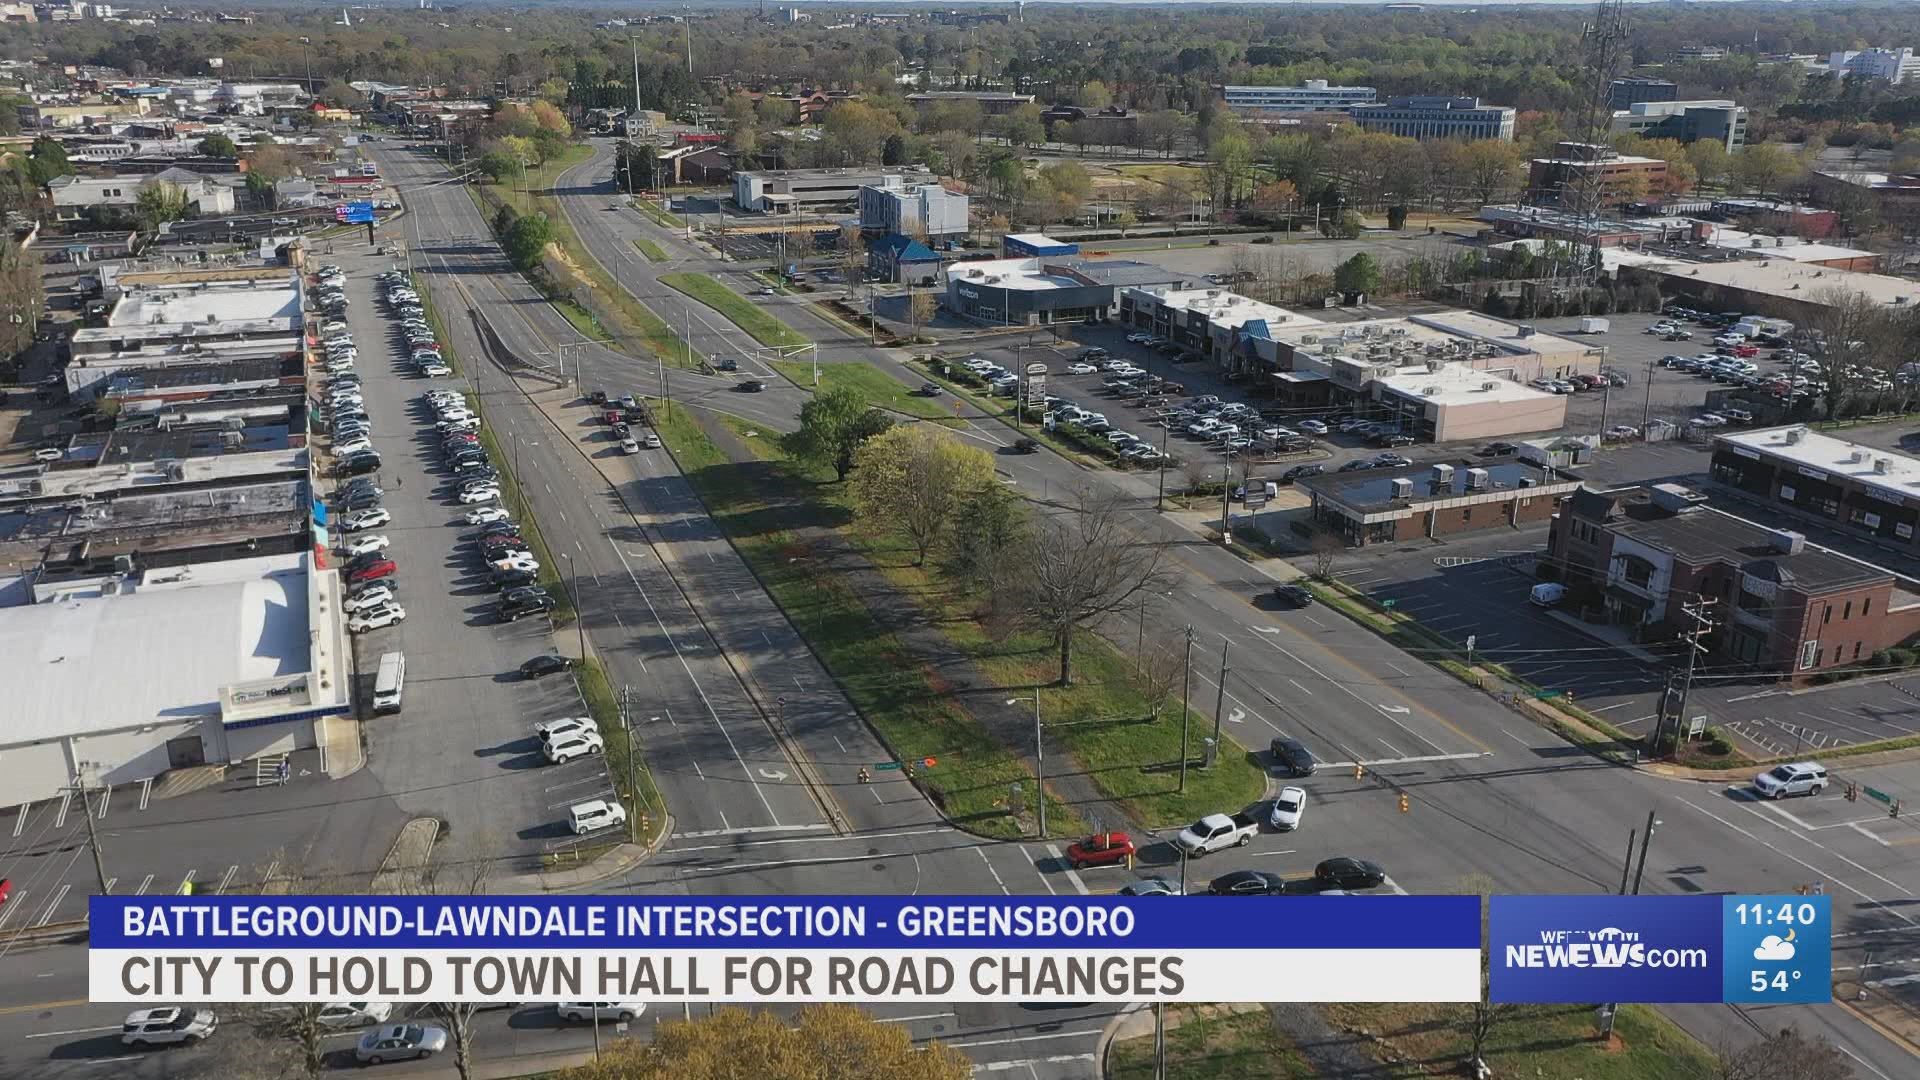 Town halls will be held so the City of Greensboro can hear from drivers about improvements they want to see along the Battleground, Lawndale corridor.